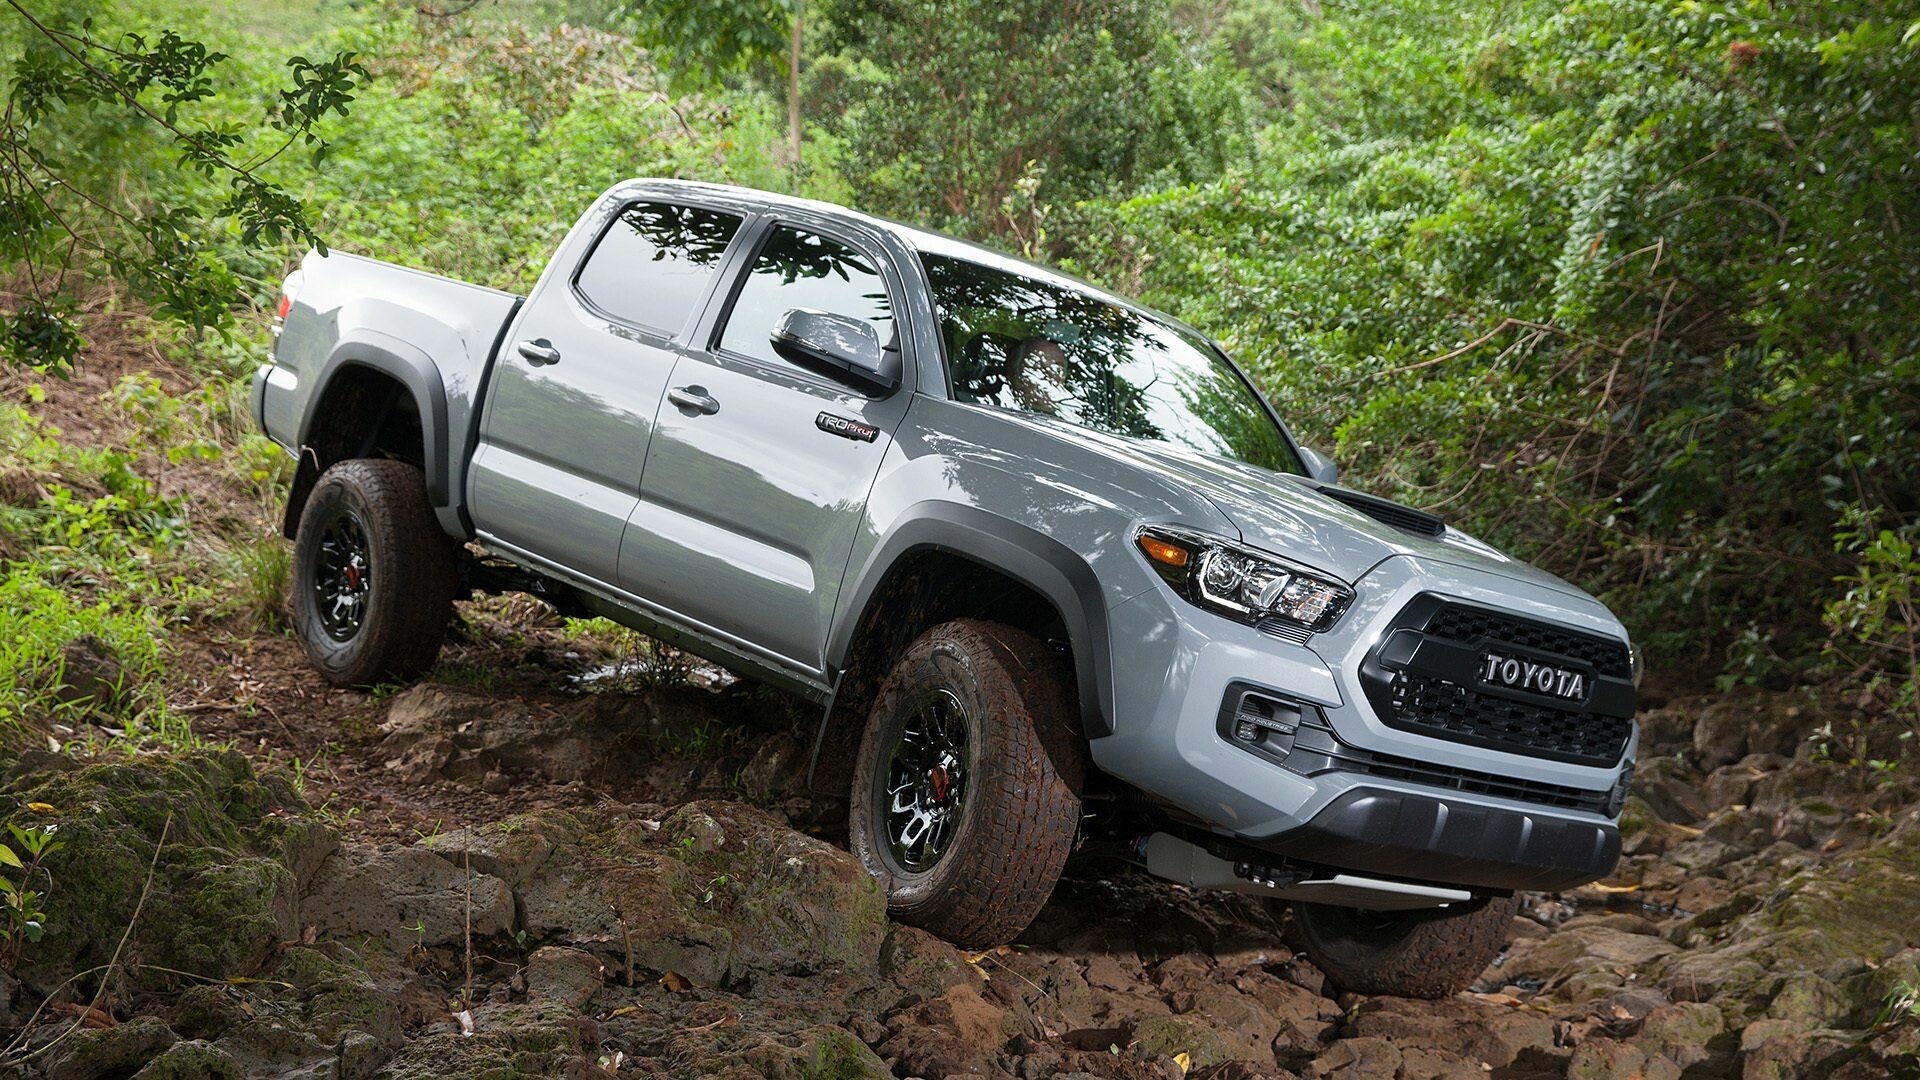 Toyota Tacoma: The TRD Off-Road trim models feature a terrain select mode. 1920x1080 Full HD Background.